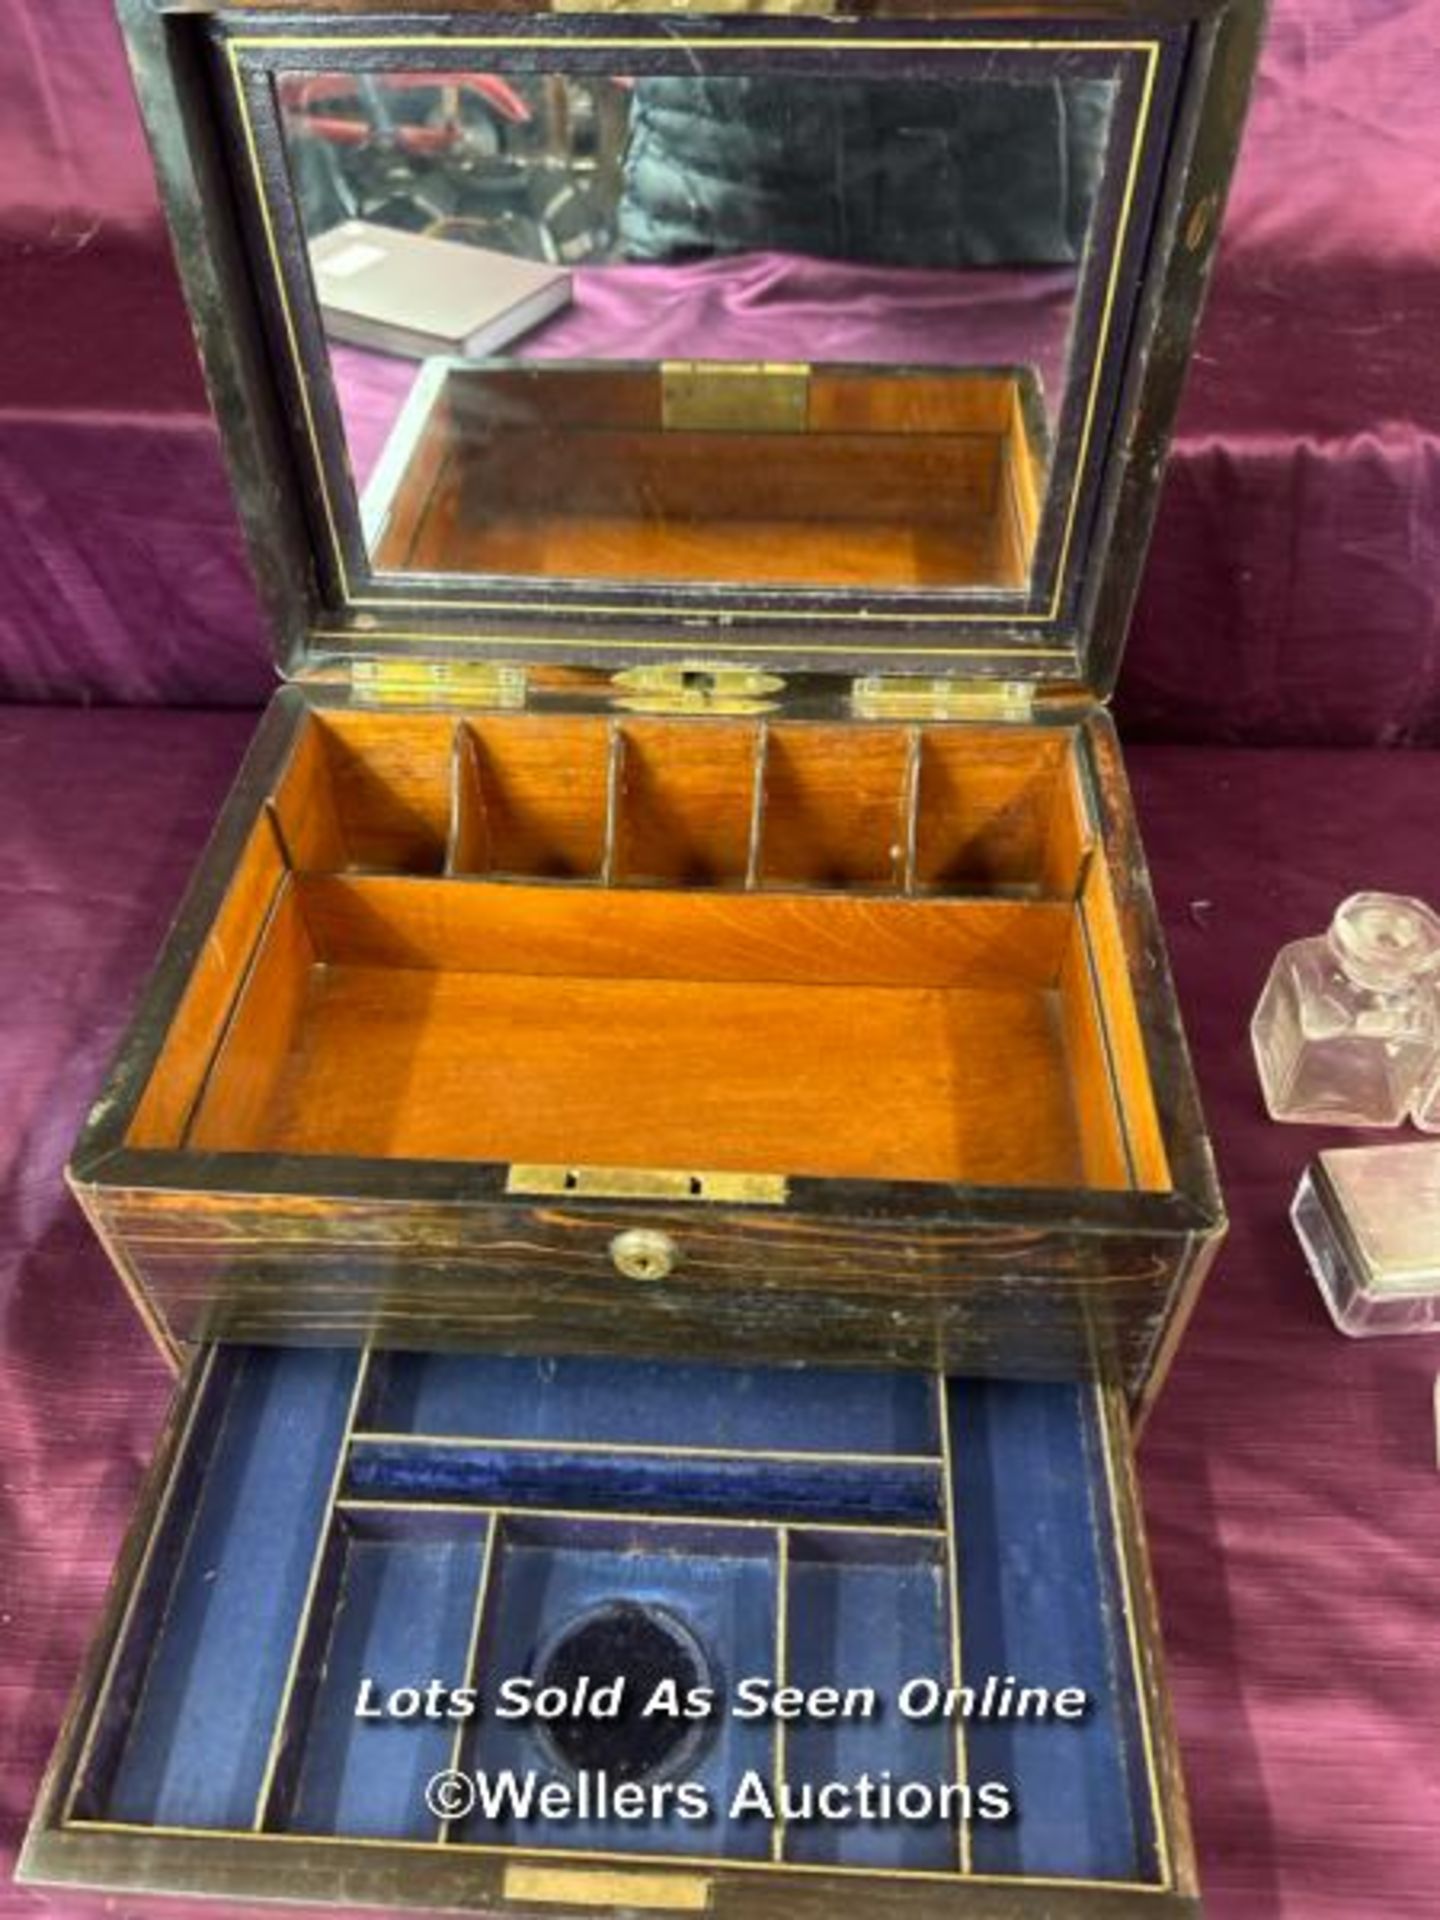 EARLY 19TH CENTURY GENTLEMAN'S VANITY BOX CONTAINING STERLING SILVER AND GLASS CONTAINERS WITH - Image 3 of 14